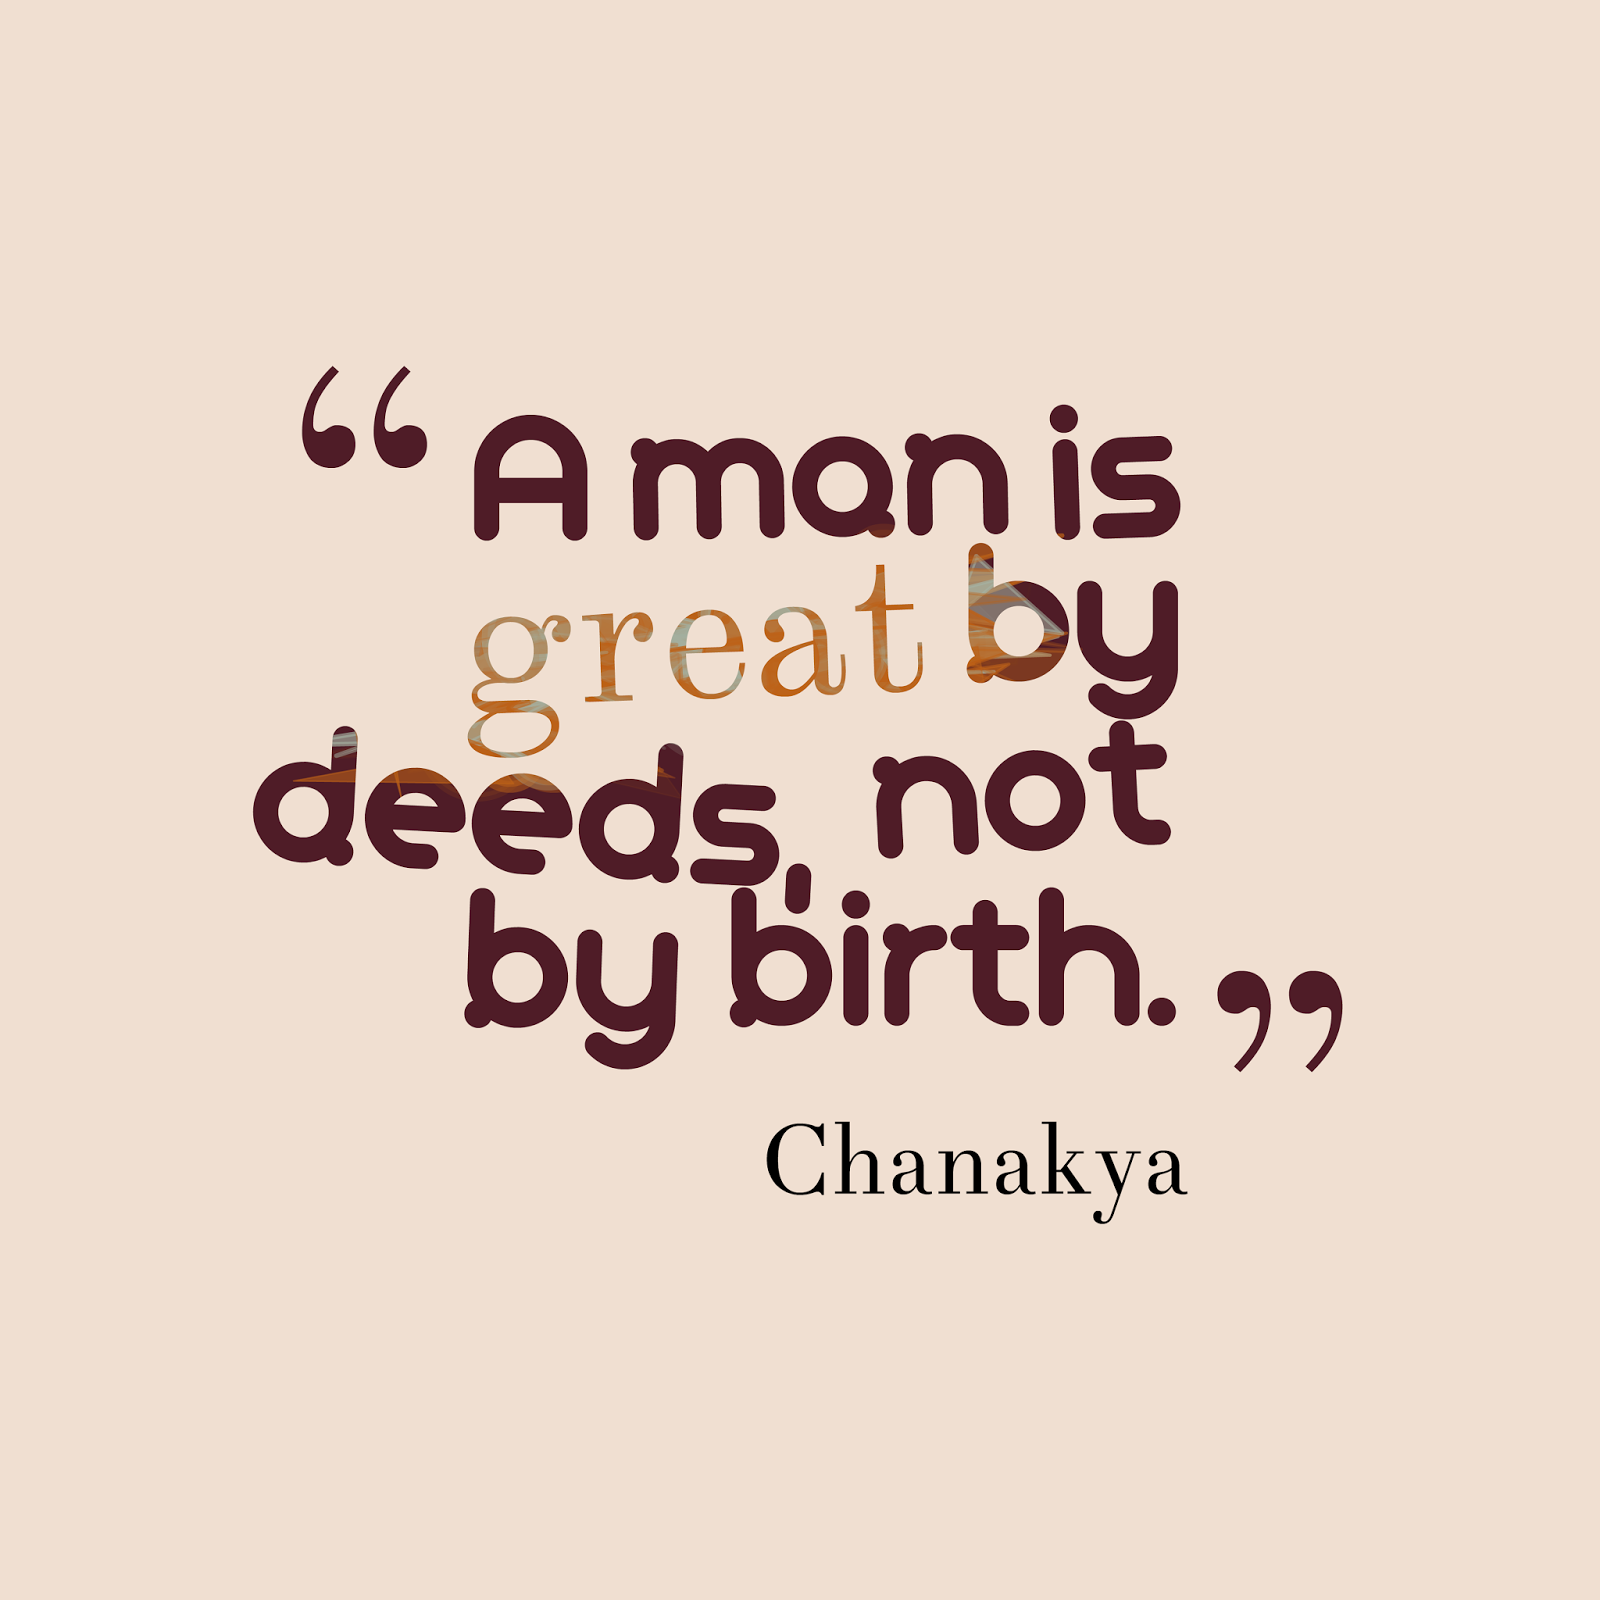 A man is great by deeds, not by birth. Chanakya